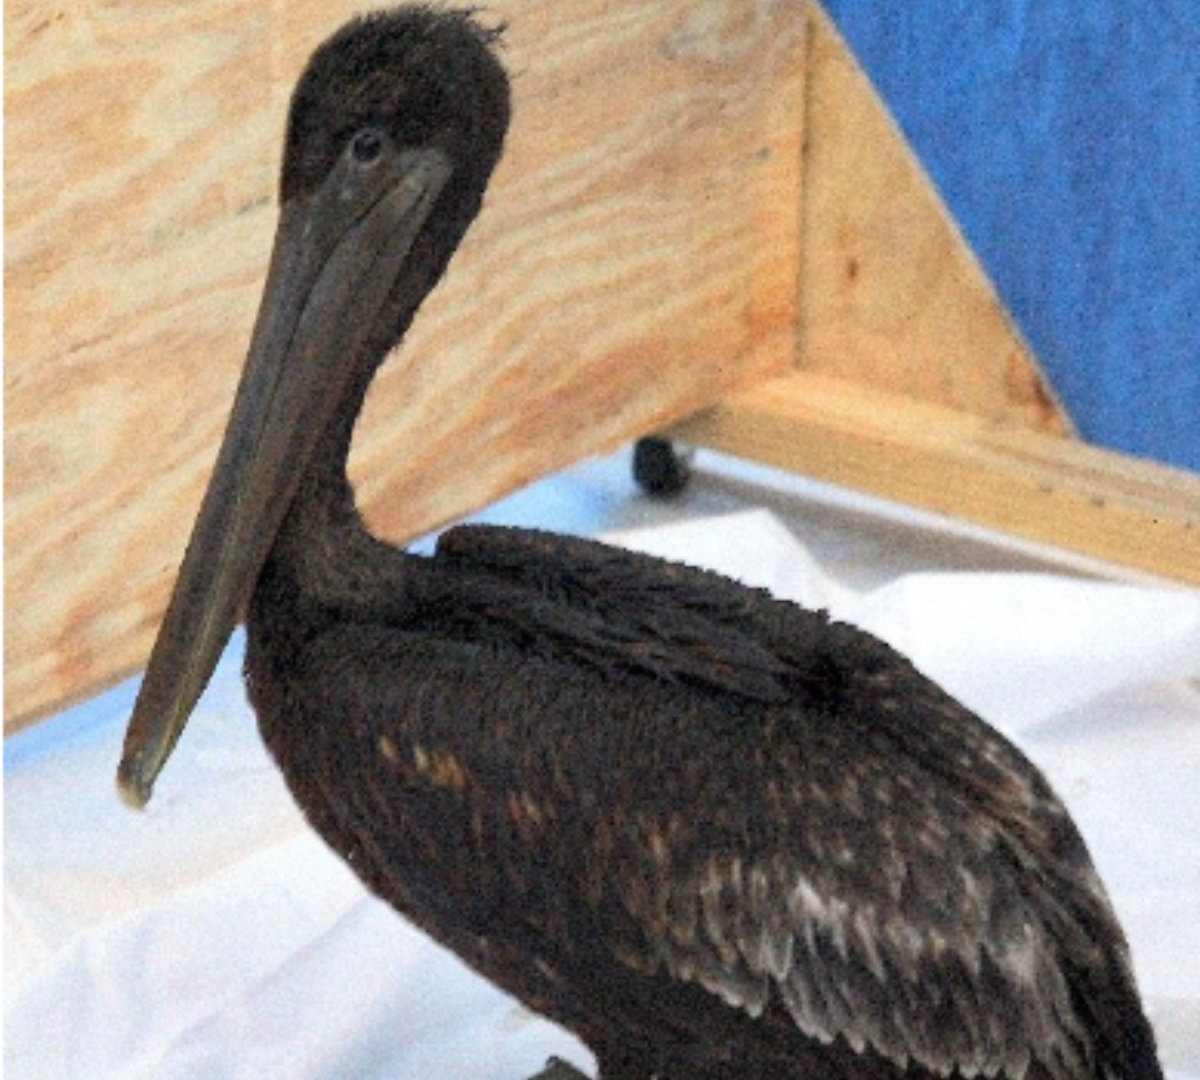 A pelican covered in a brown/black substance.